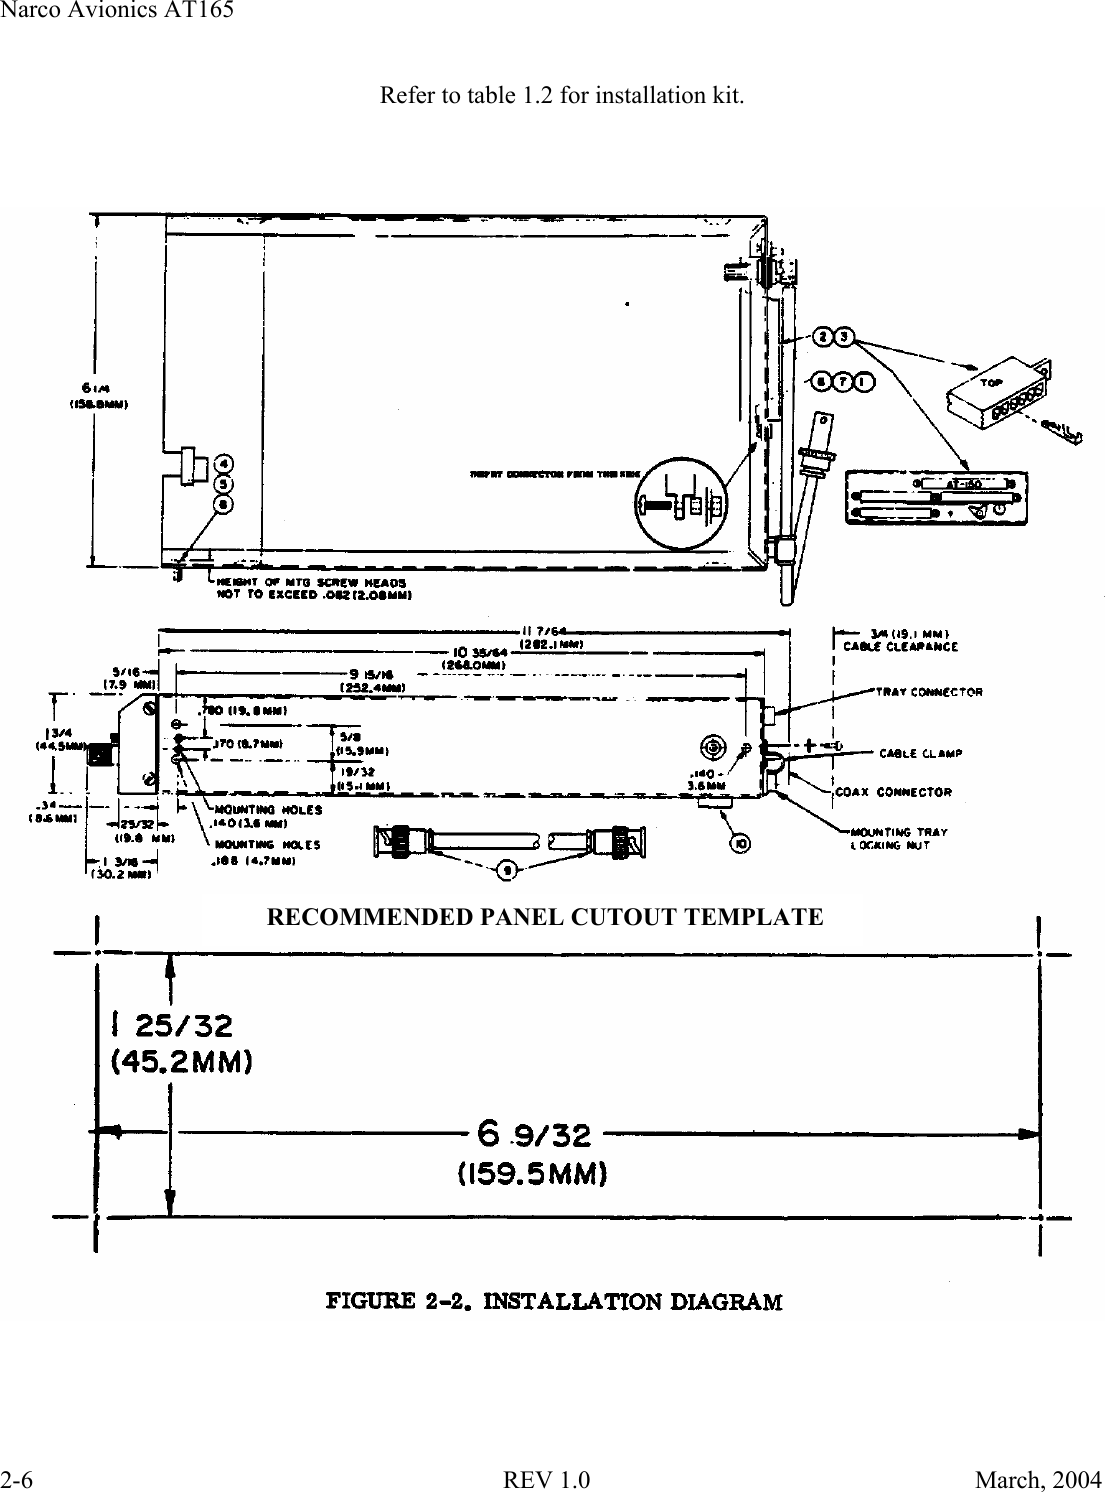 Narco Avionics AT165   2-6                                 REV 1.0    March, 2004 Refer to table 1.2 for installation kit.            RECOMMENDED PANEL CUTOUT TEMPLATE 